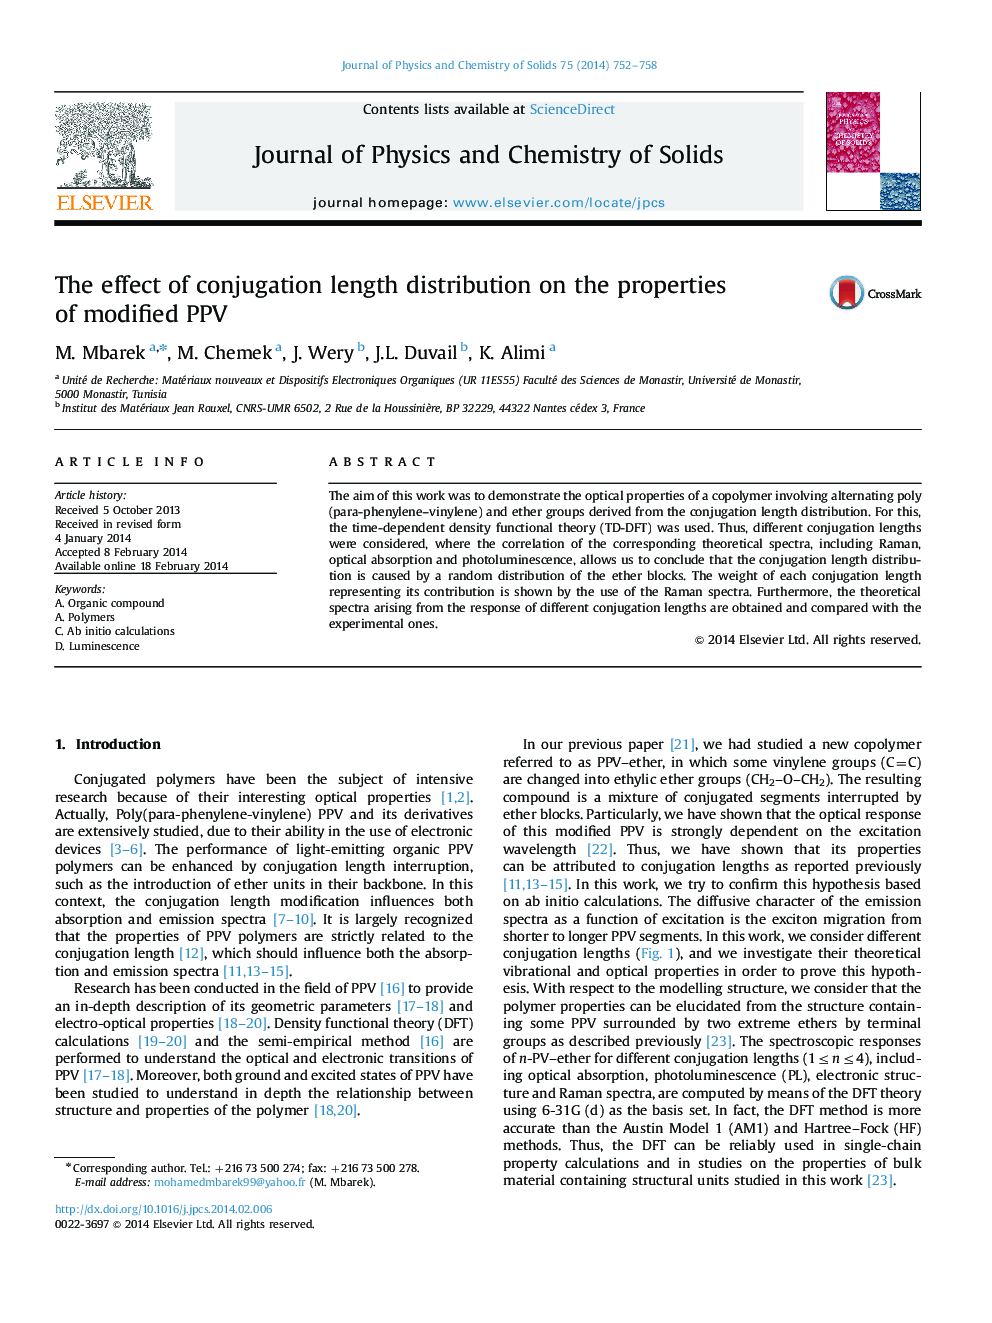 The effect of conjugation length distribution on the properties of modified PPV